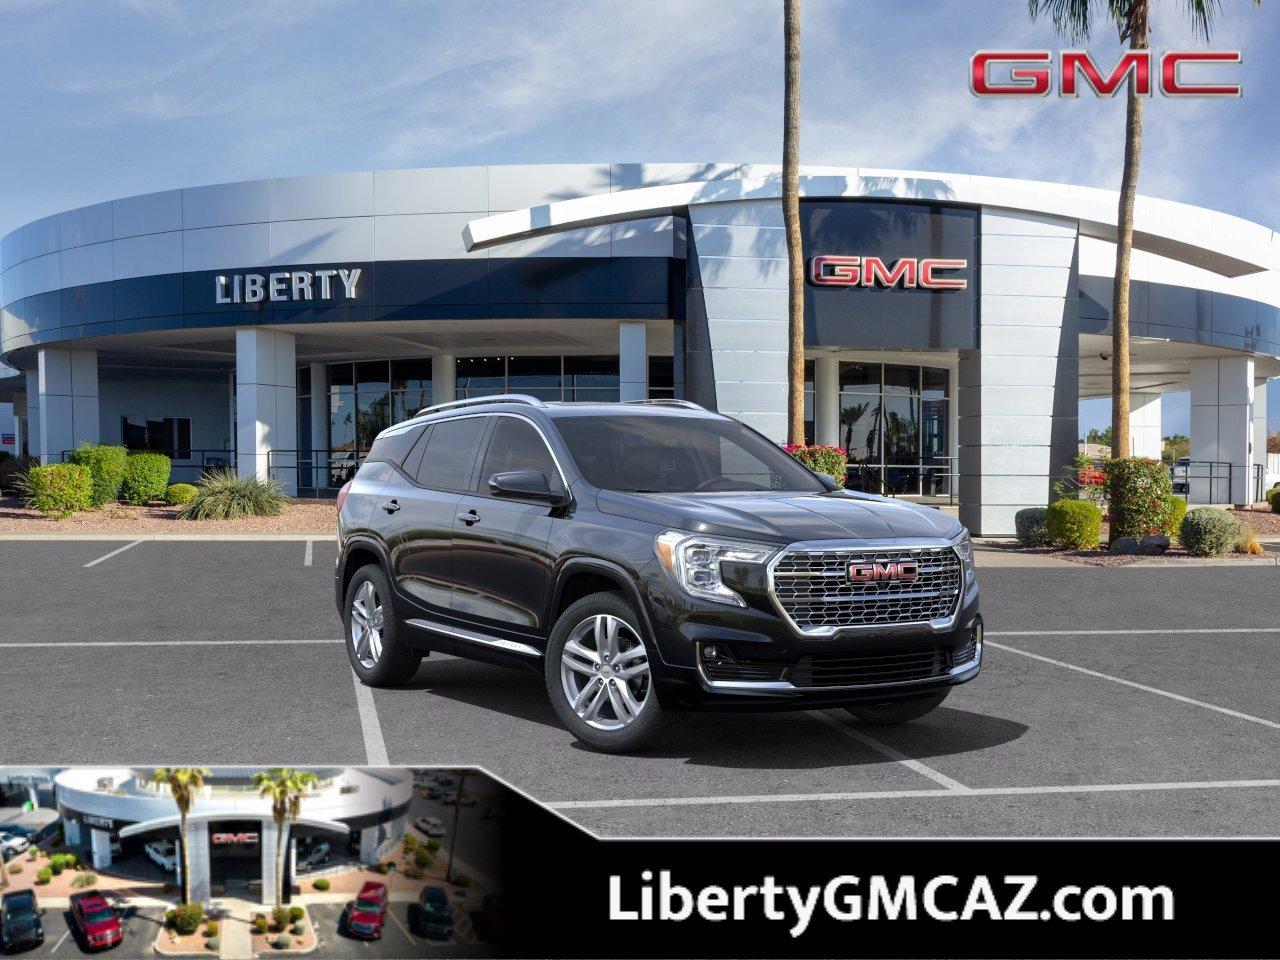 Liberty GMC - New and Used SUVs and Trucks Retailer in PEORIA near Glendale